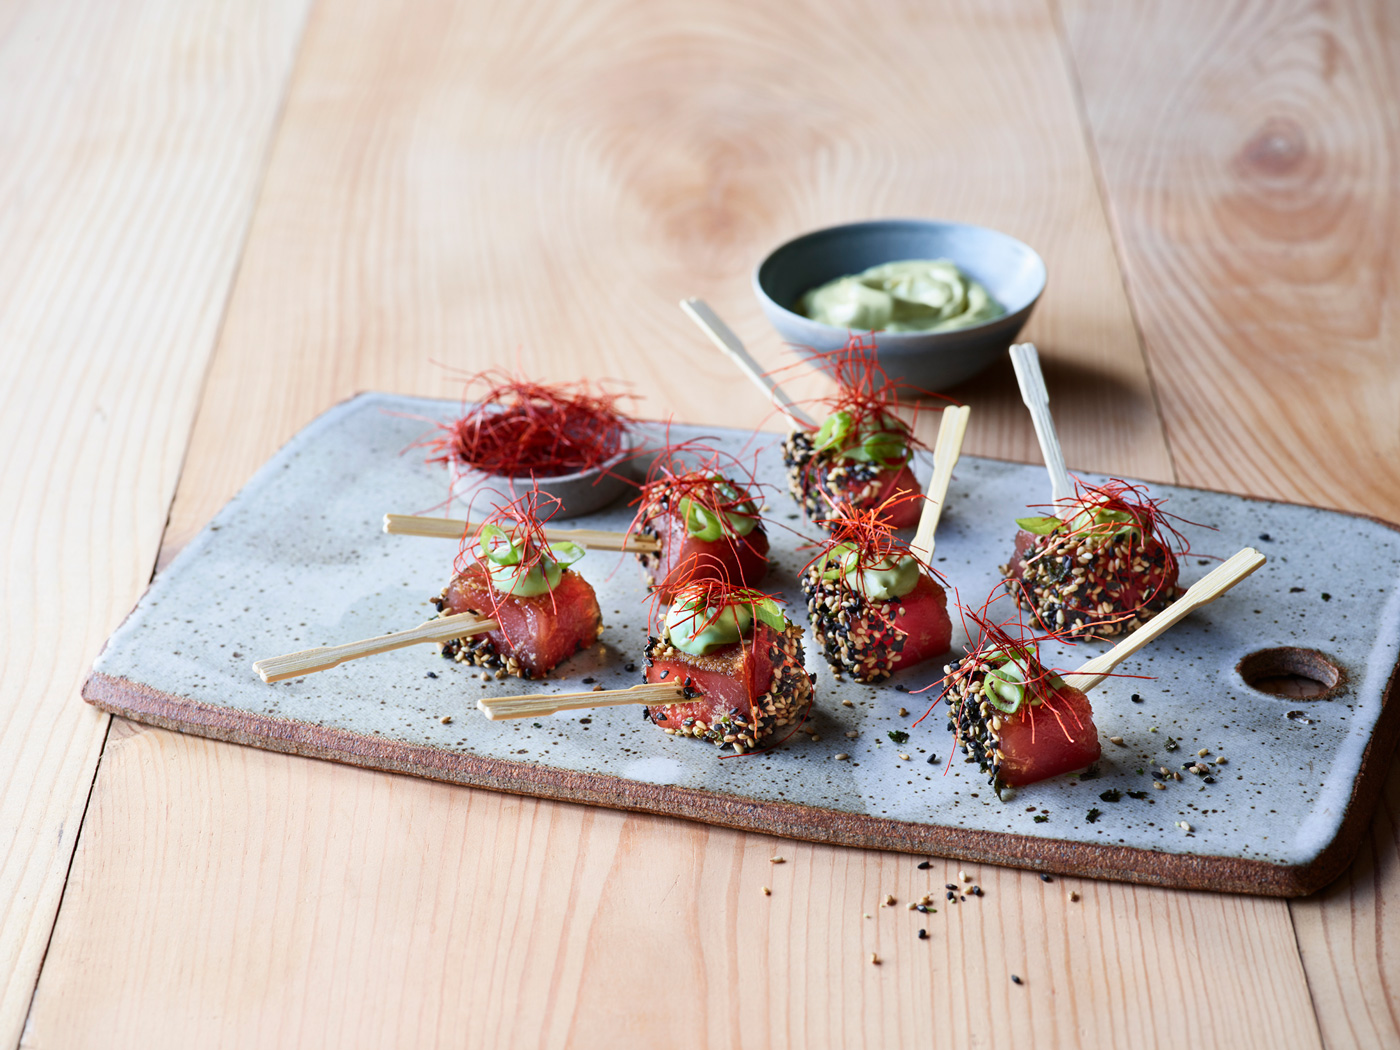 Poke skewers on a ceramic serving surface